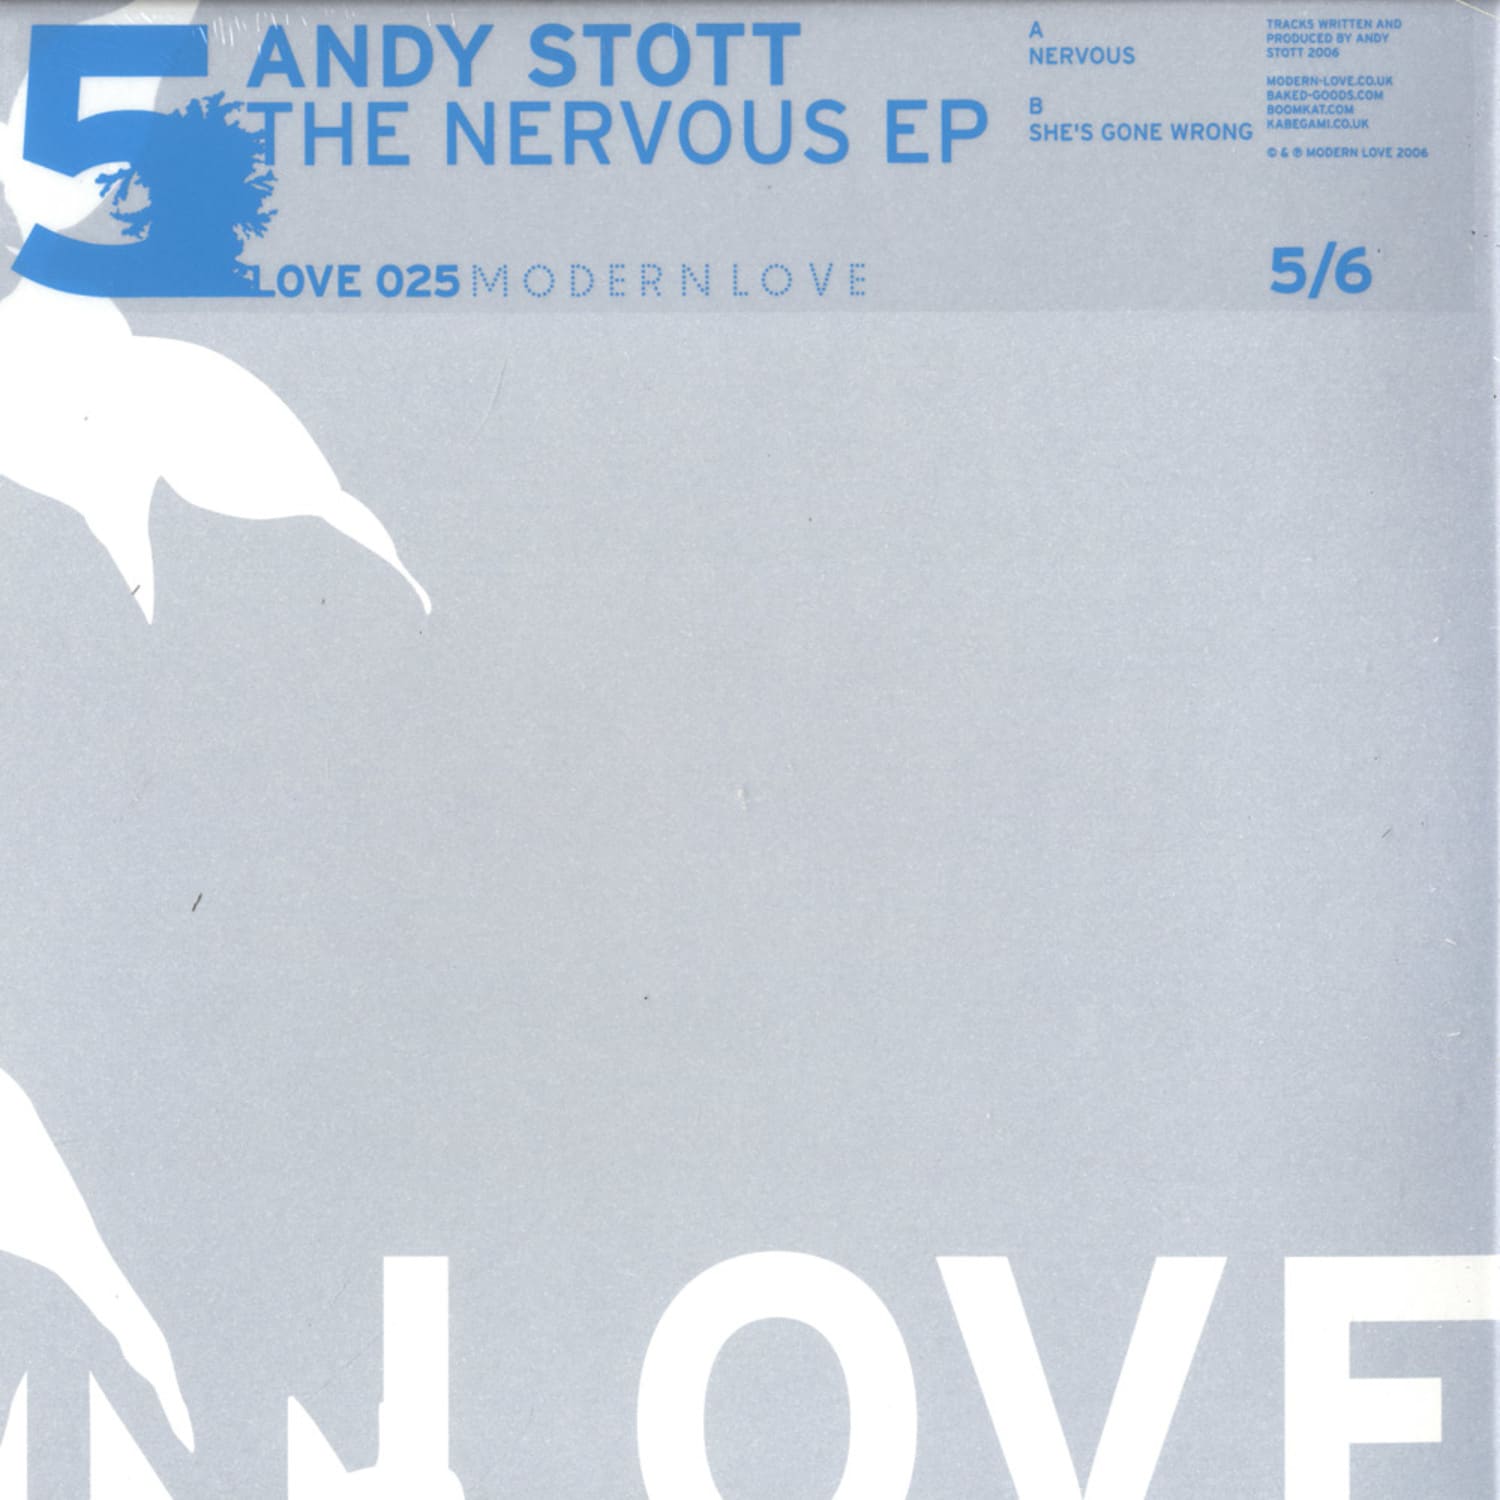 Andy Stott - THE NERVOUS EP